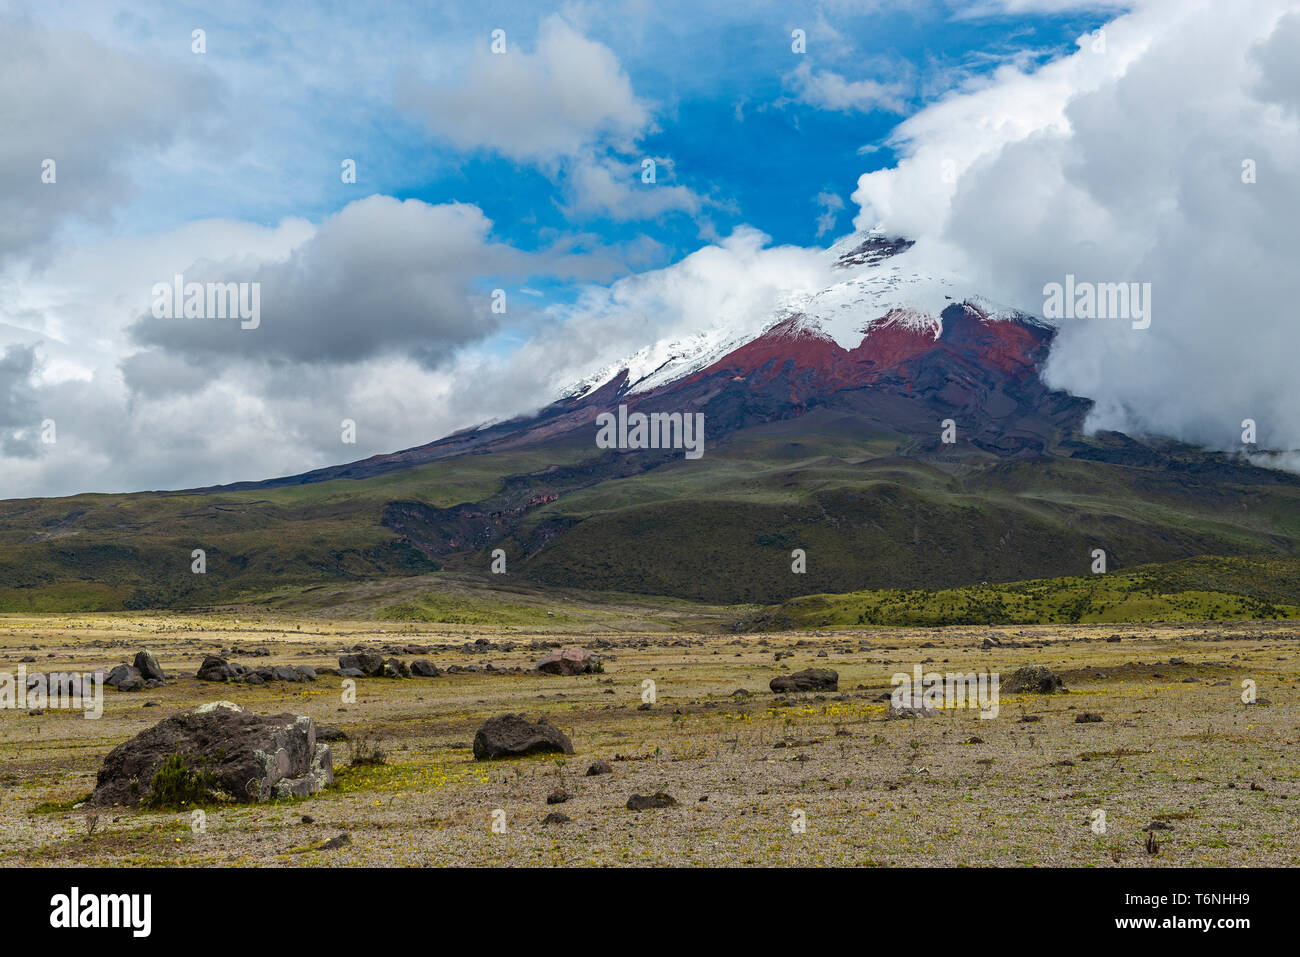 The majestic peak of the Cotopaxi volcano in the Andes mountain range, Cotopaxi national park, Quito, Ecuador. Stock Photo